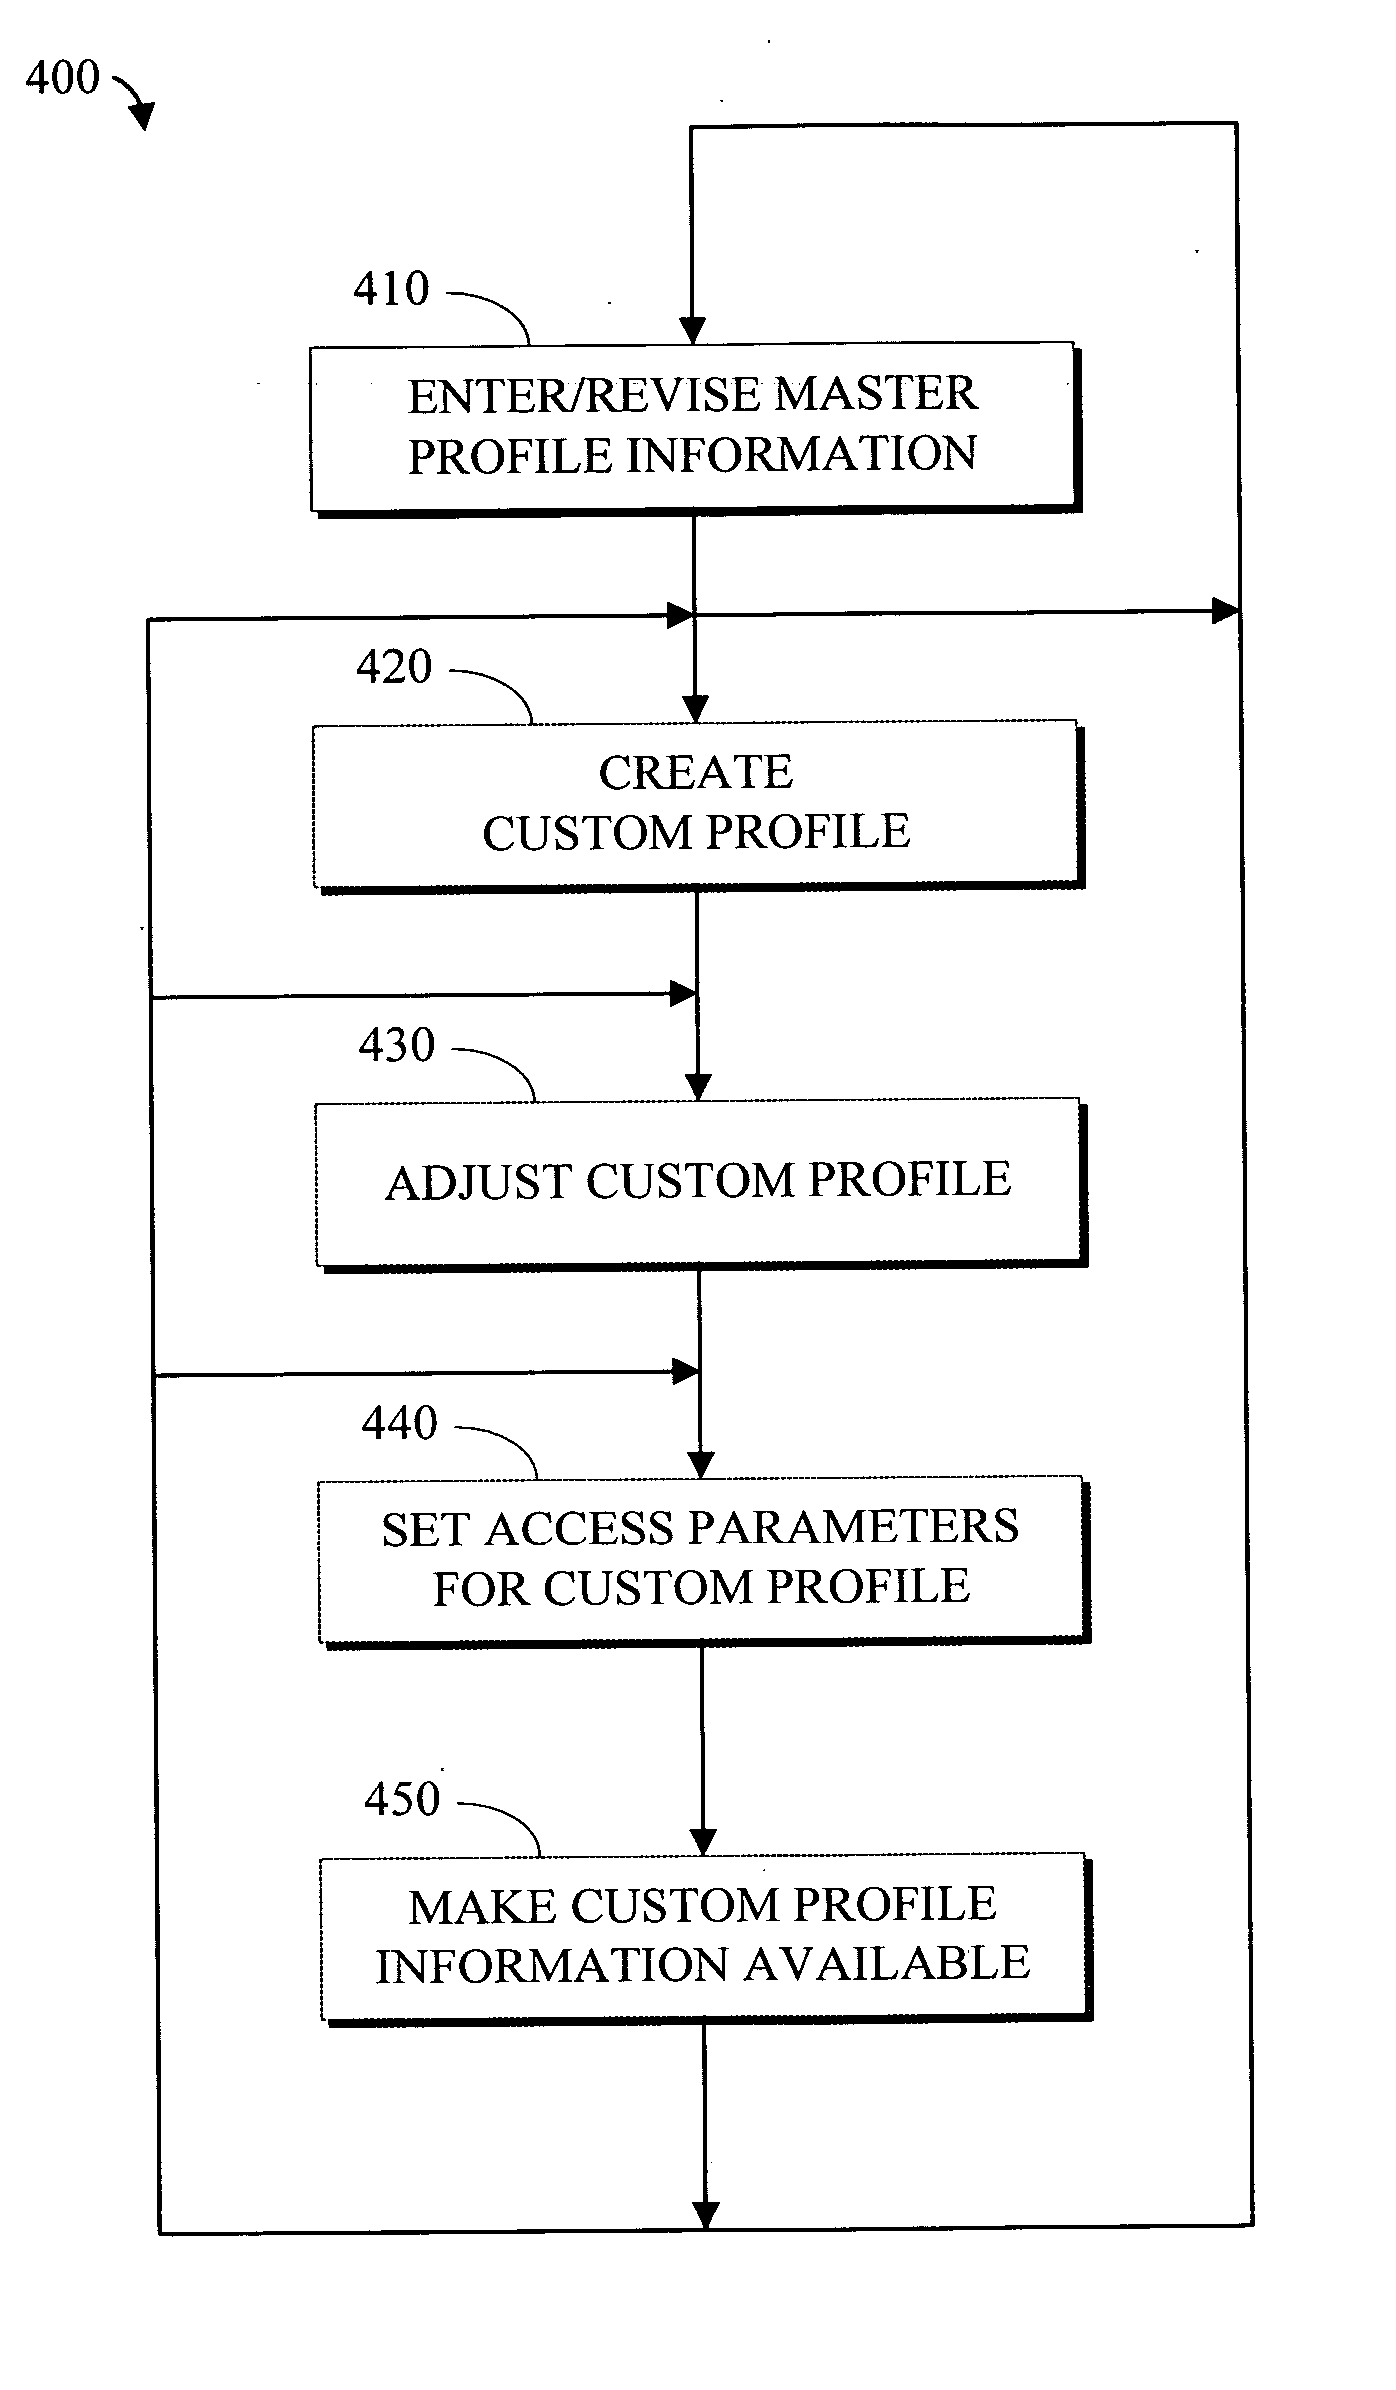 Apparatus and method for computerized information management